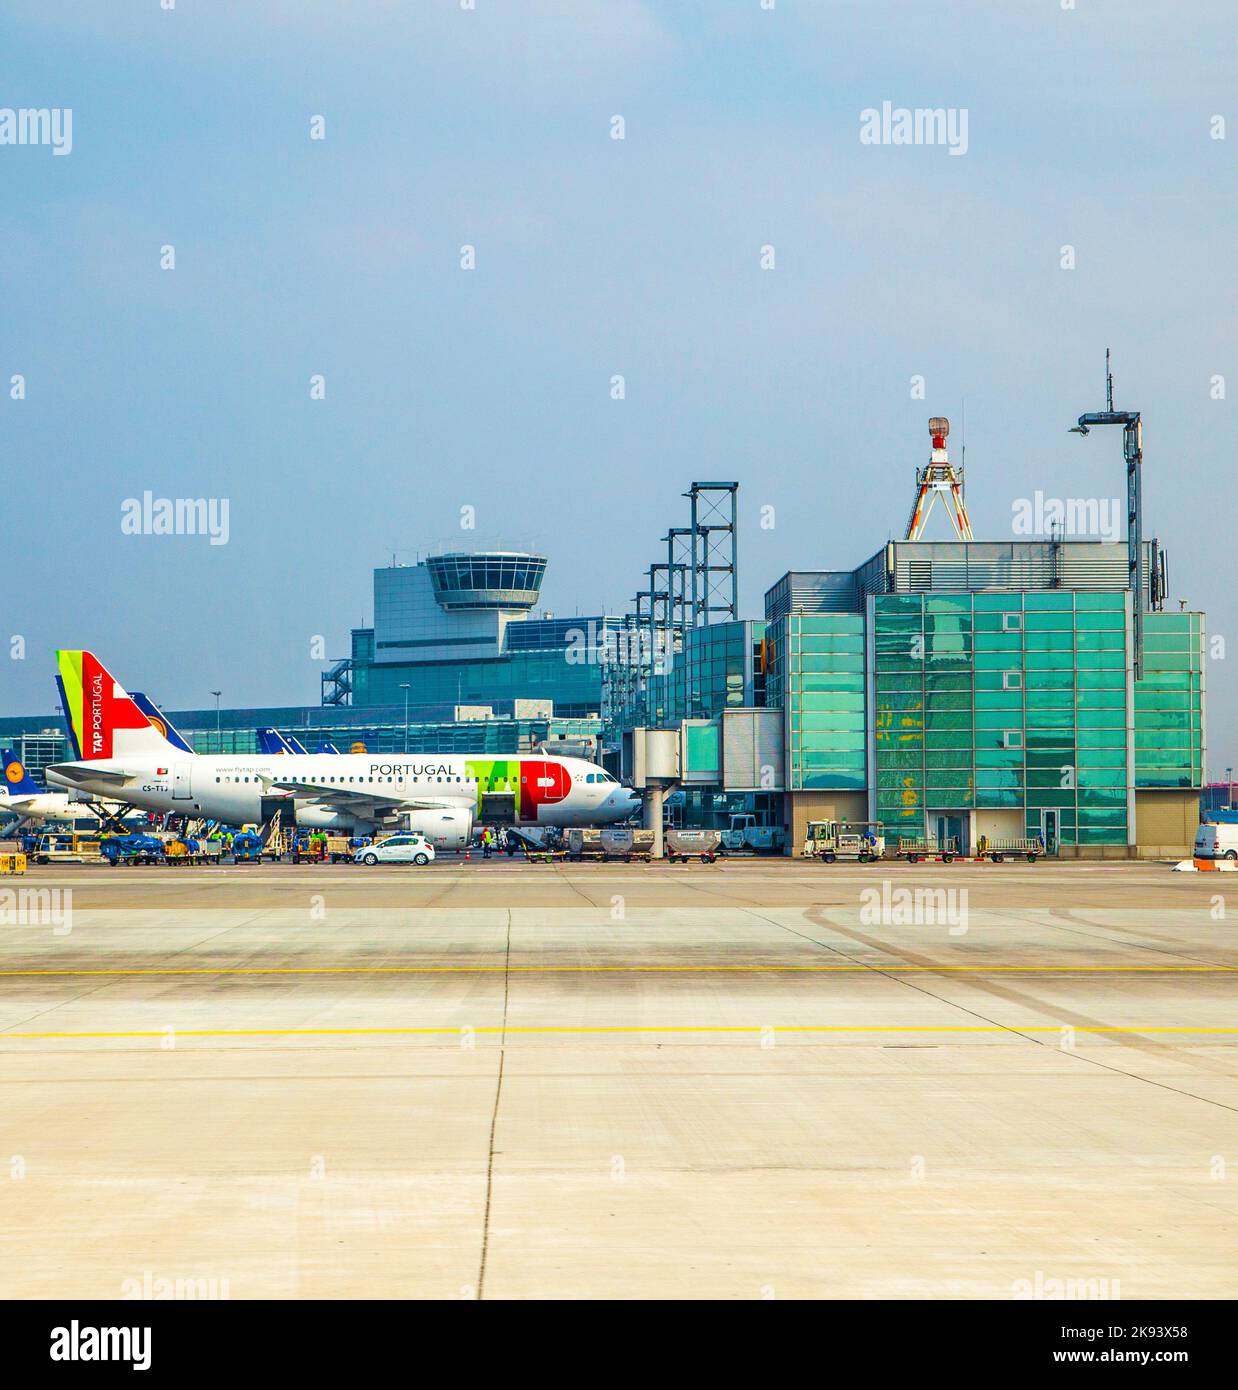 Frankfurt, Germany - March 28, 2013: TAP Flight ready to head to runway  in Frankfurt, Germany. New Terminal A is under construction for airport enlar Stock Photo